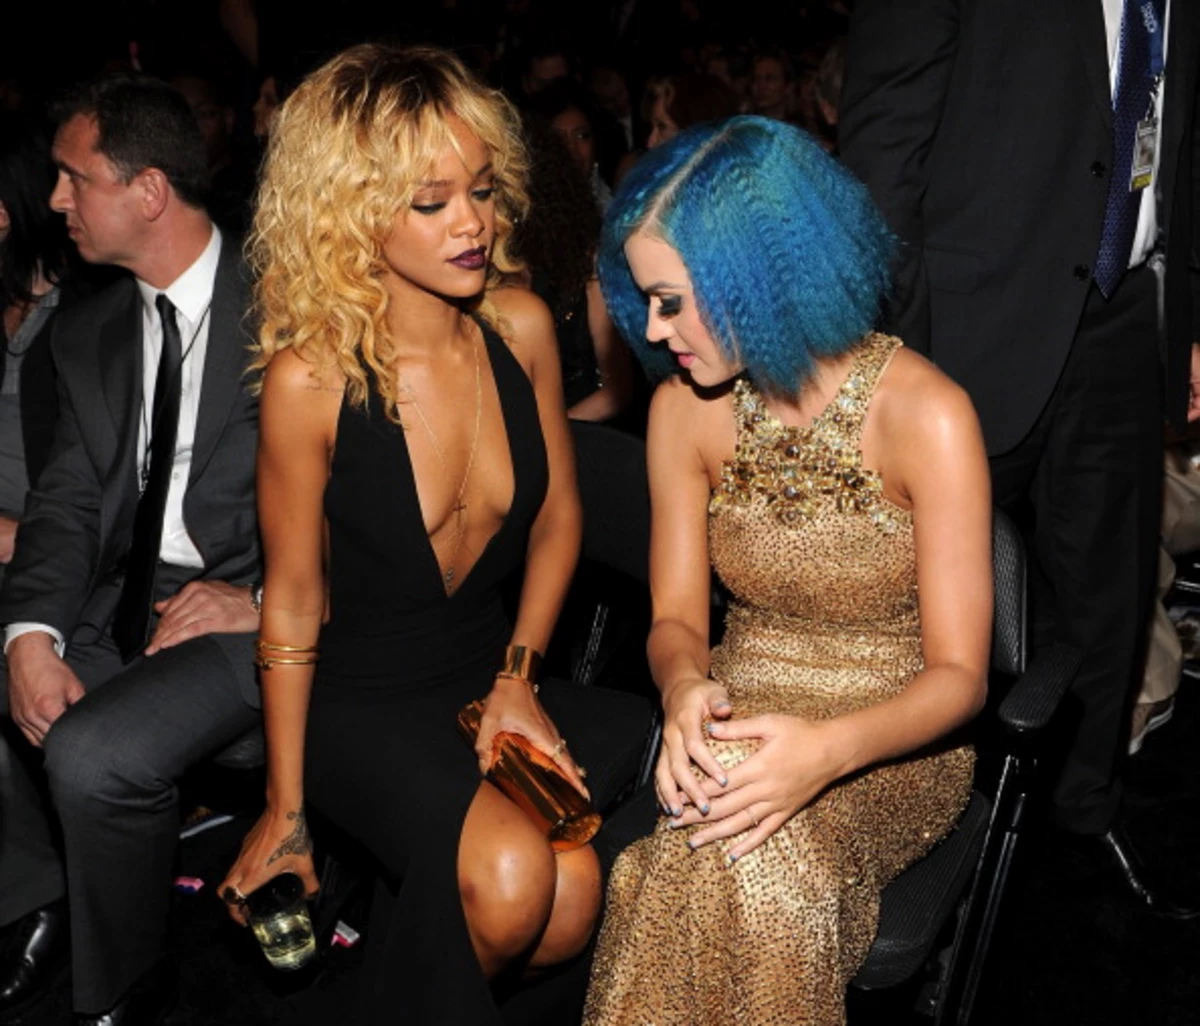 Katy Perry Celeb Porn - Why Is Katy Perry Starring At Rihanna's Chest? [Photos]